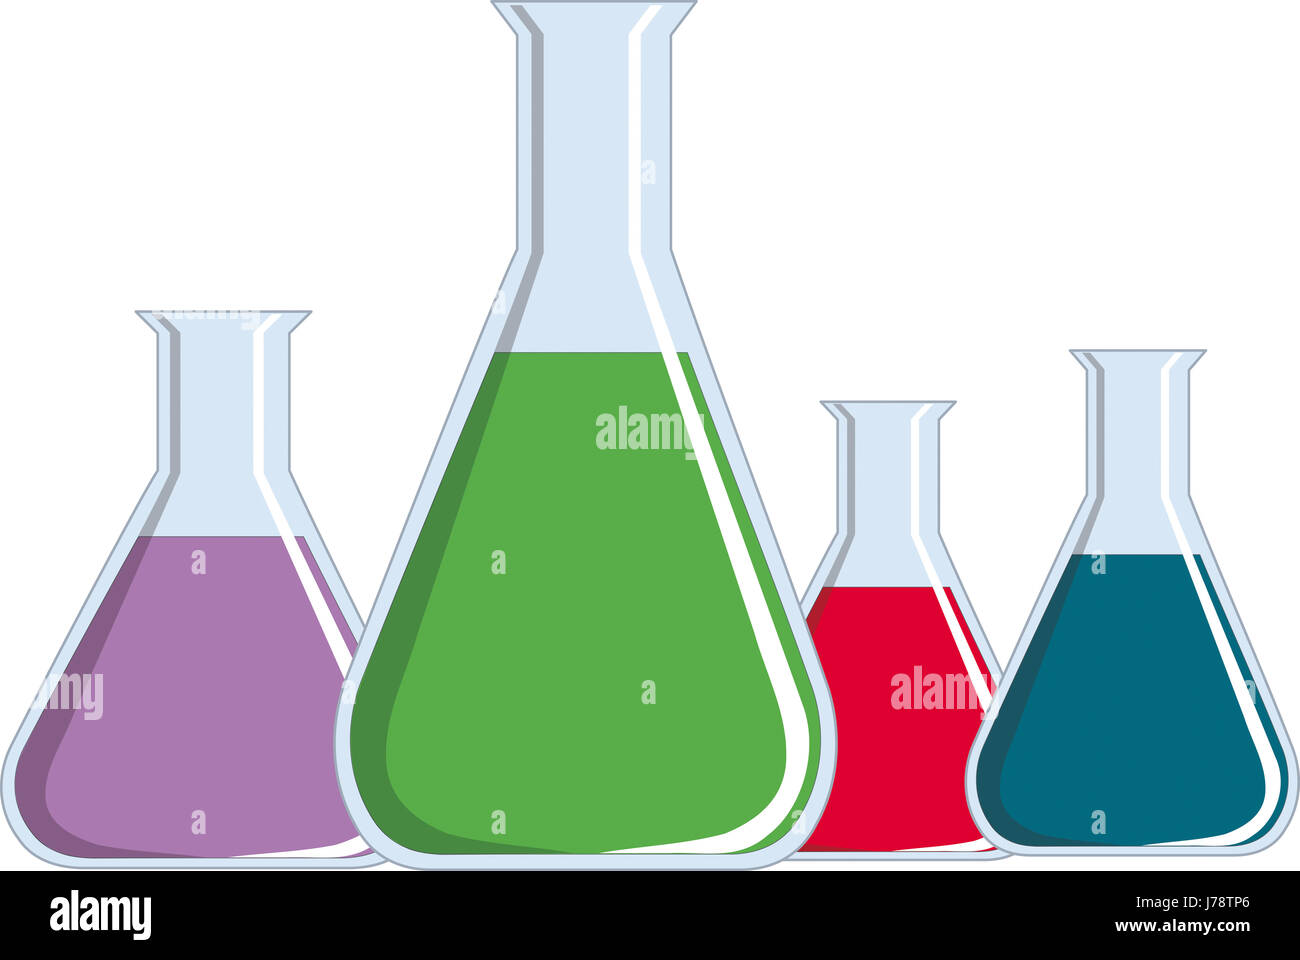 science illustration chemistry chemical school educational institution Stock Photo